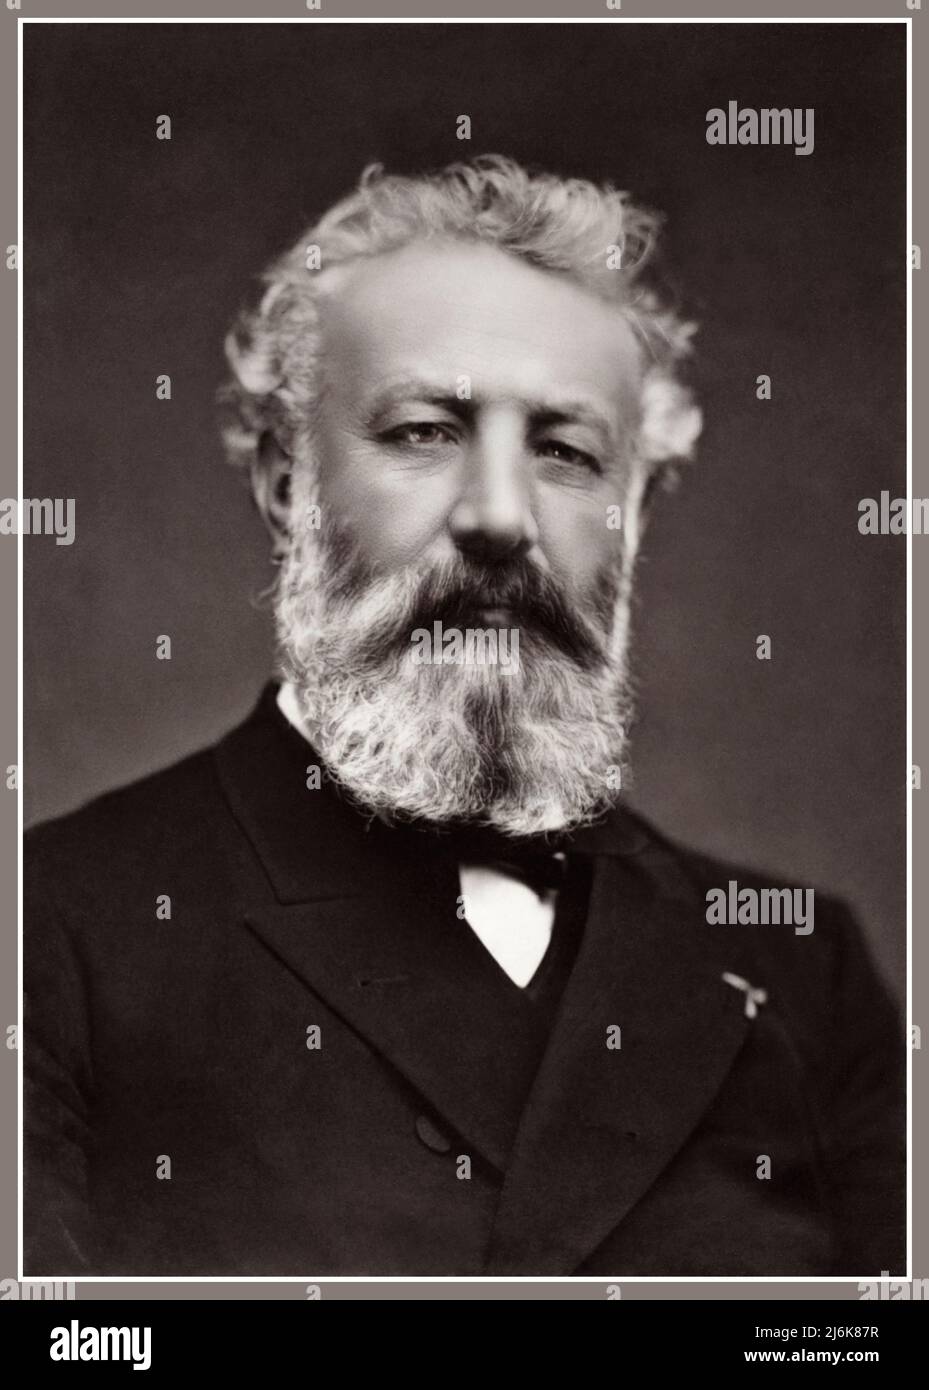 JULES VERNE Etienne Carjat's photo of Jules Verne in Nantes  from the Société de Géographie, Paris copy of Year 2, Issue 11 of the Paris-Artiste Woodburytype, Date Pubished c. 9 February 1884. Stock Photo